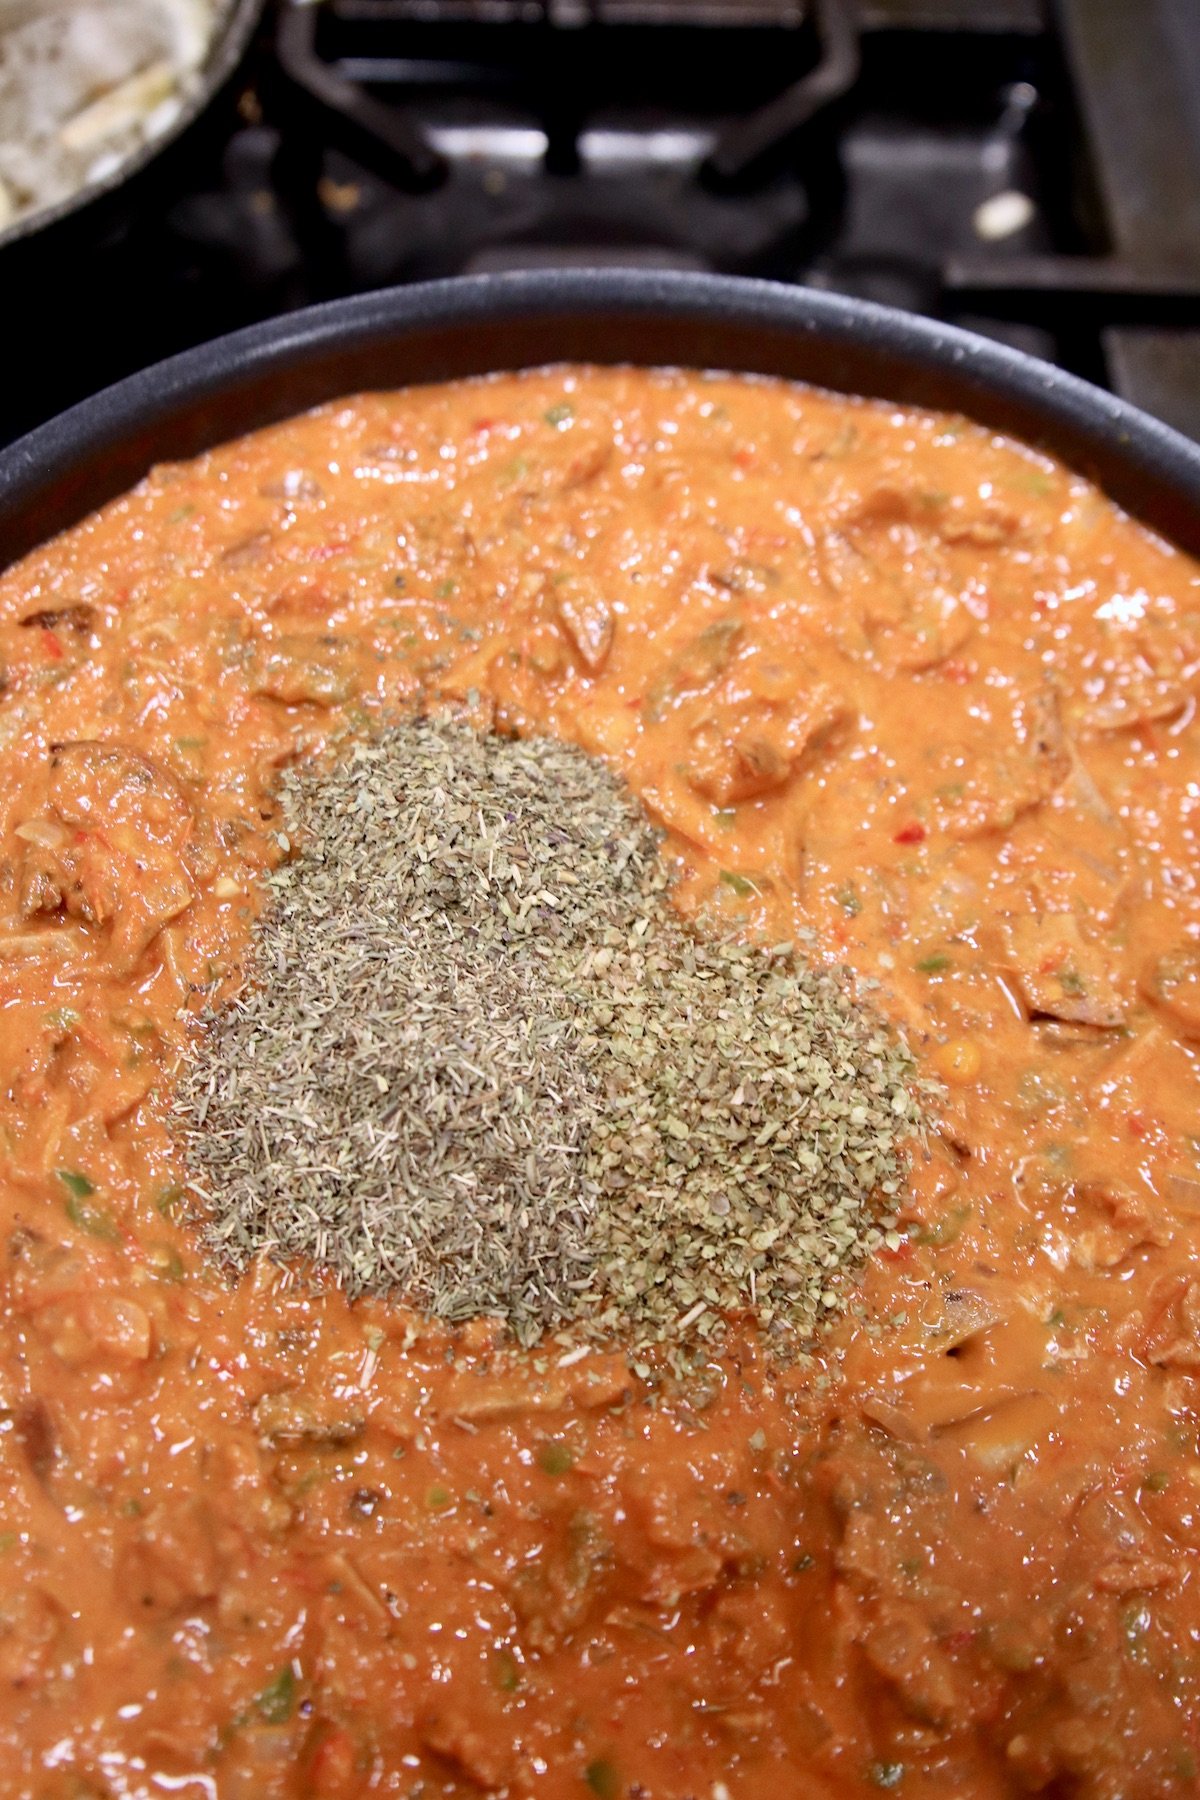 dried spices added to meat sauce in a skillet